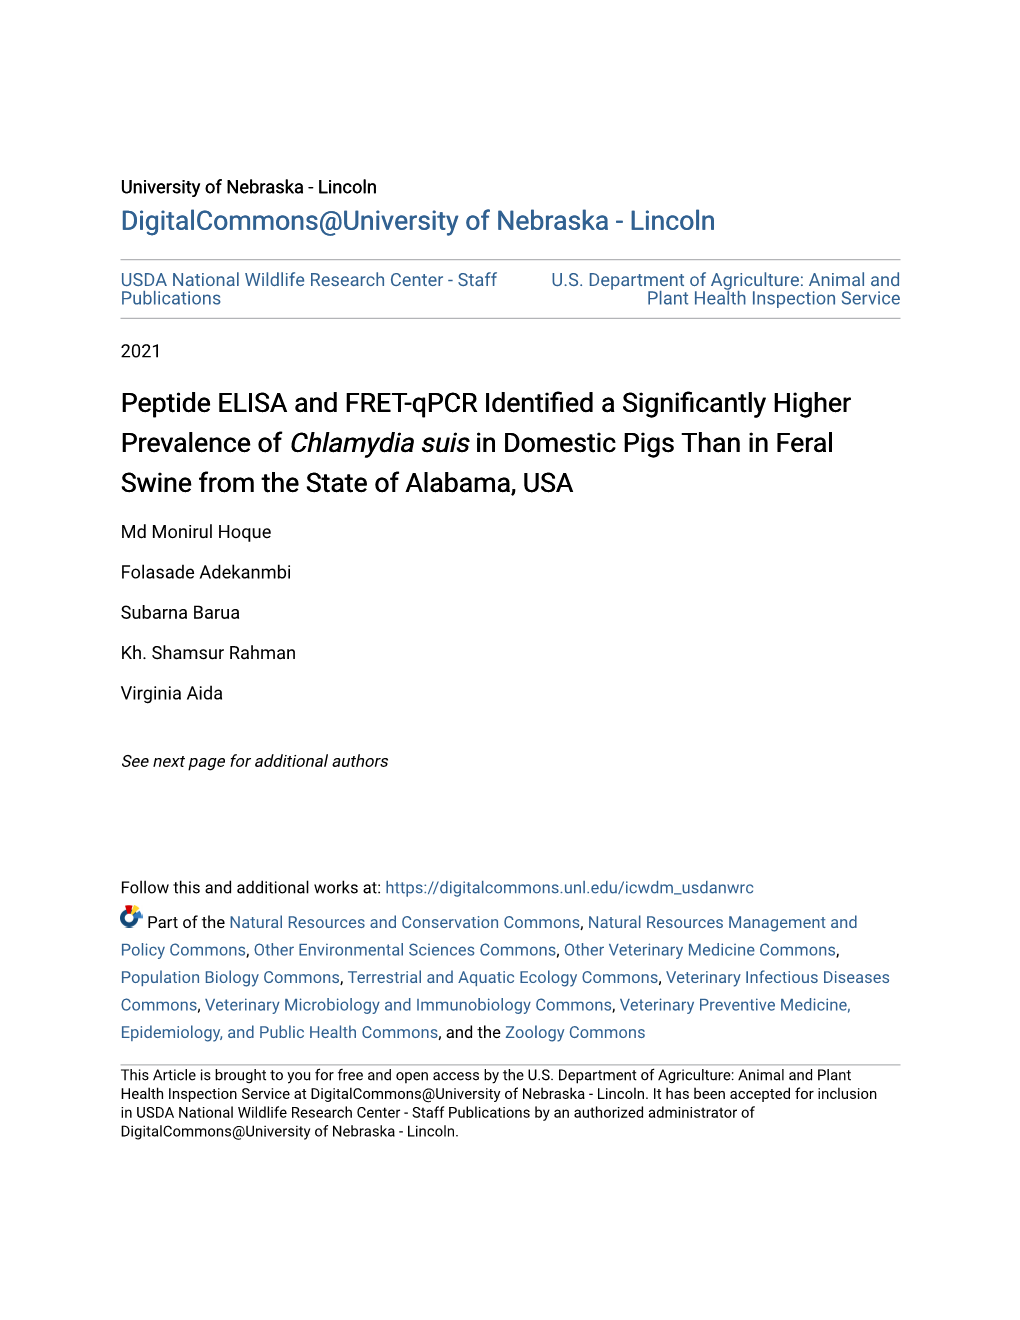 Peptide ELISA and FRET-Qpcr Identified a Significantly Higher Prevalence of Chlamydia Suis in Domestic Pigs Than in Feral Swine from the State of Alabama, USA